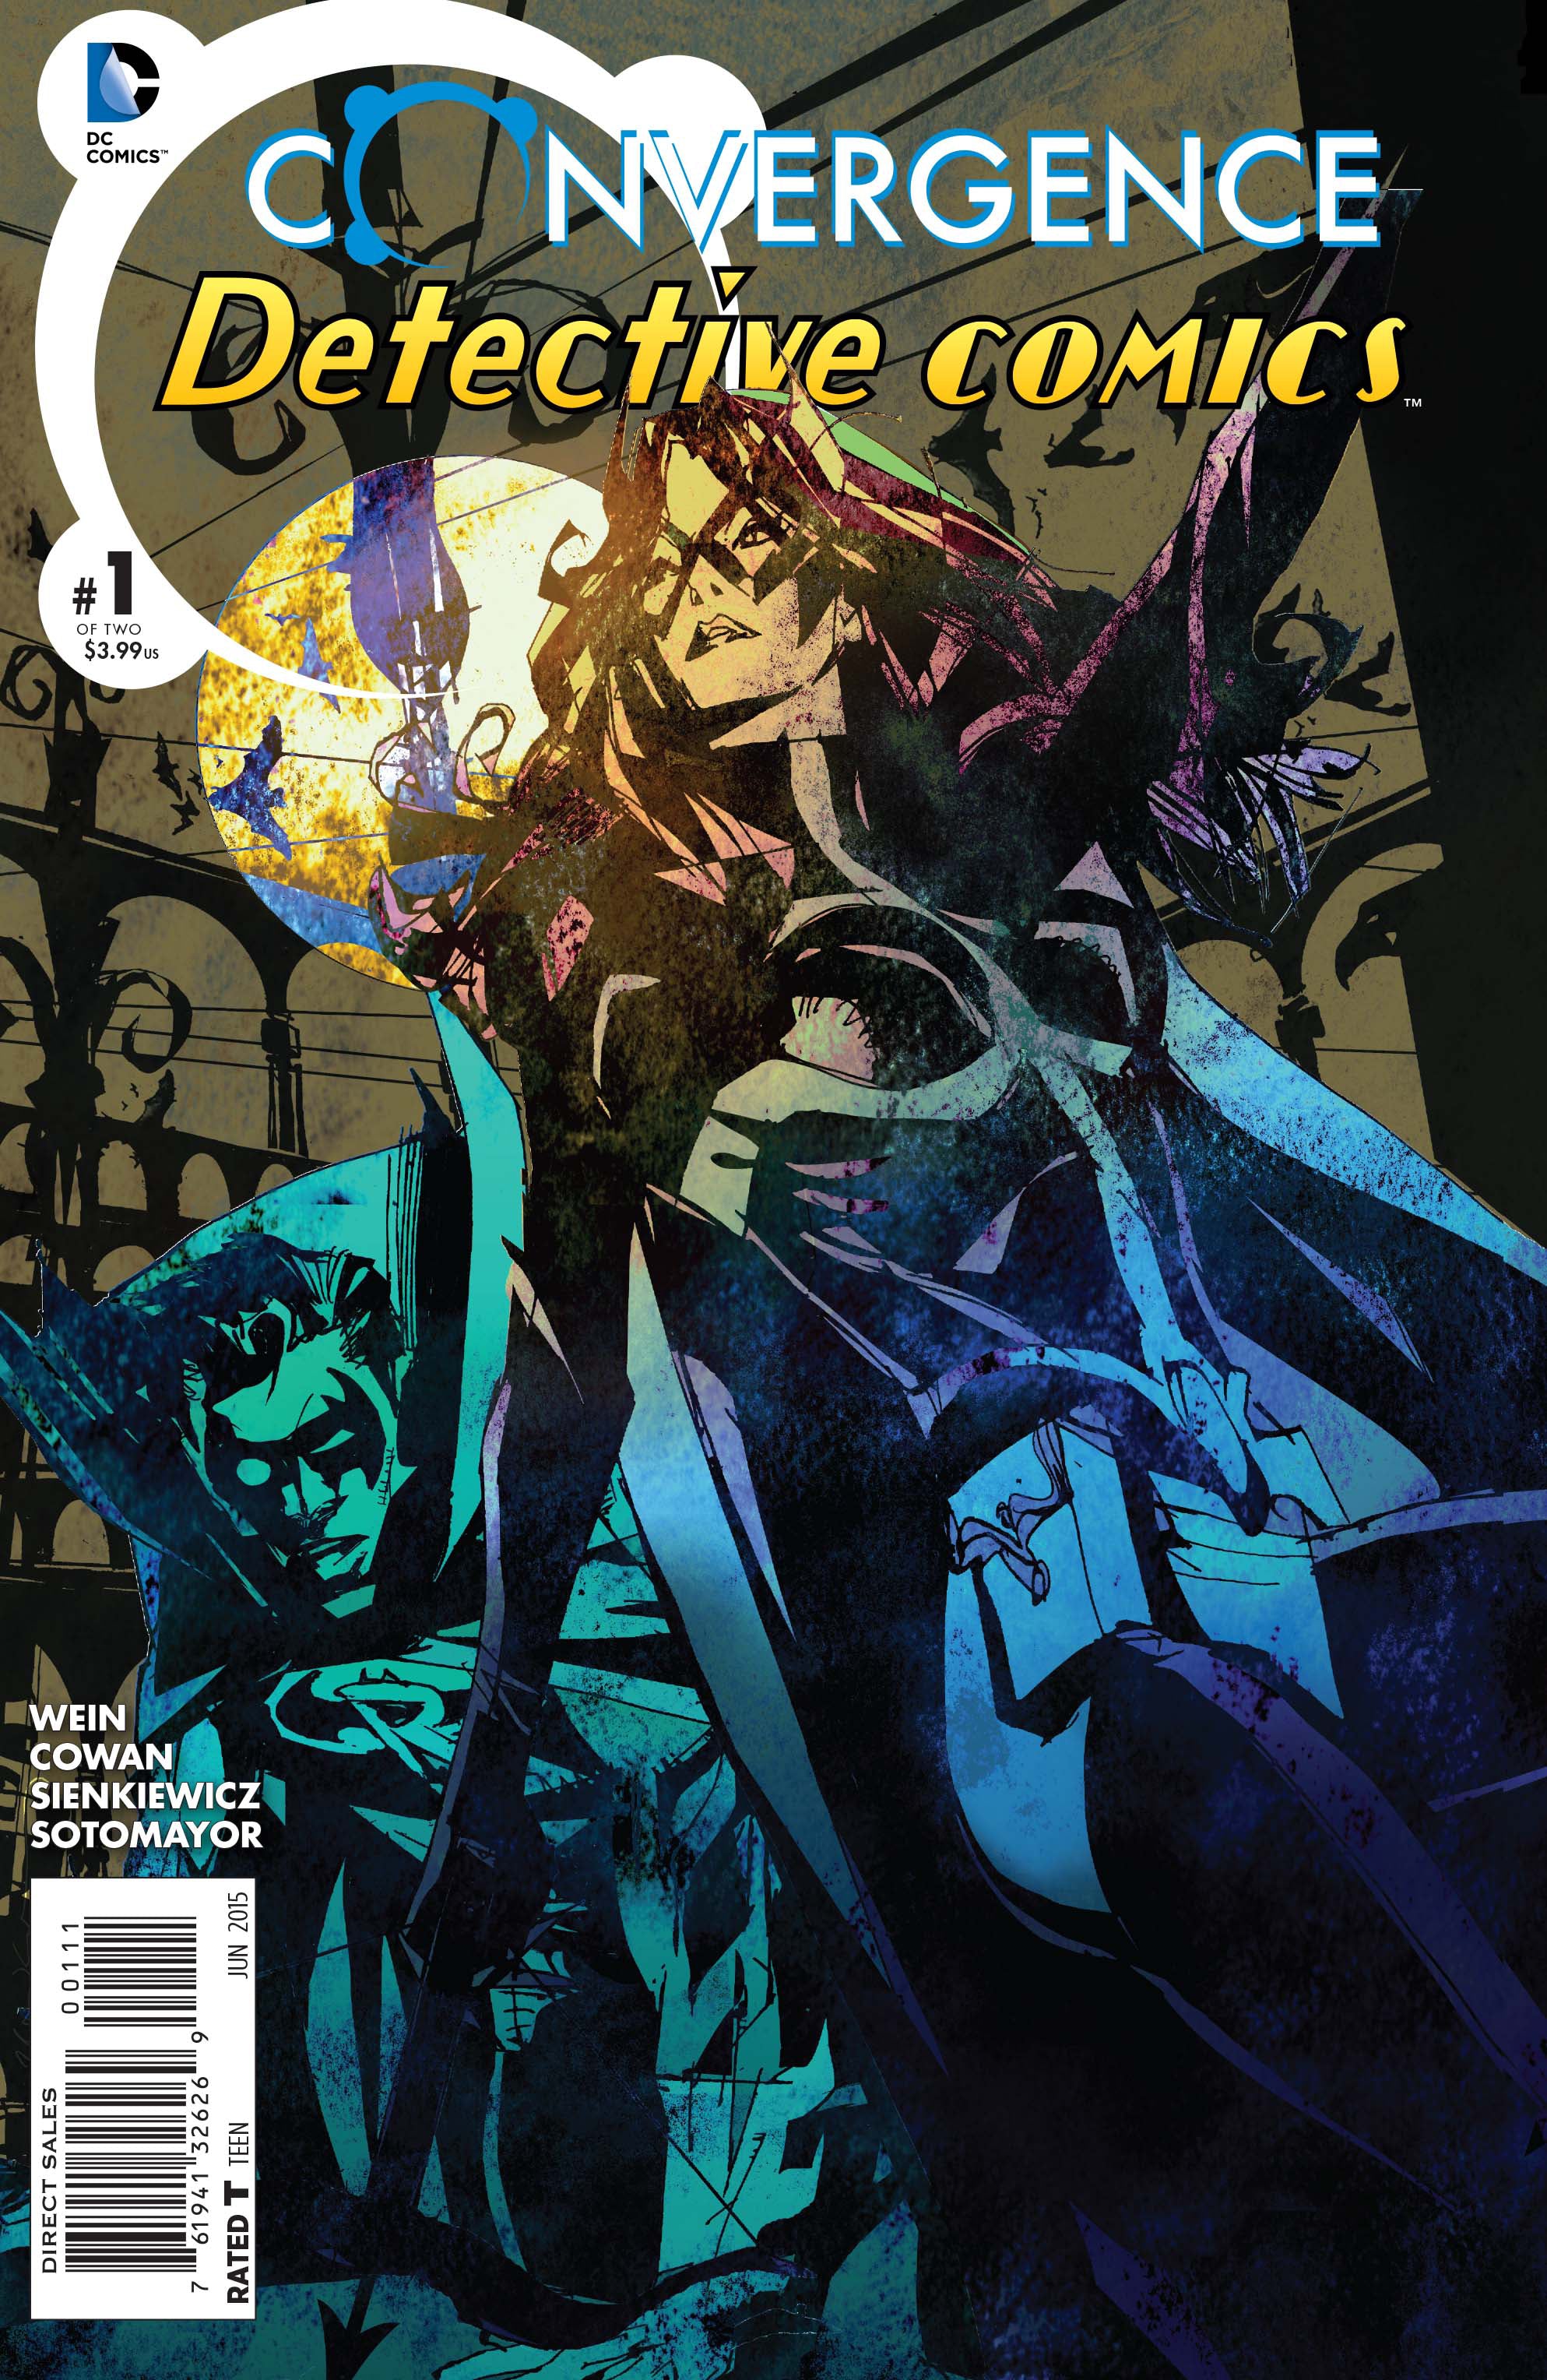 CONVERGENCE DETECTIVE COMICS #1 and #2 | Game Master's Emporium (The New GME)